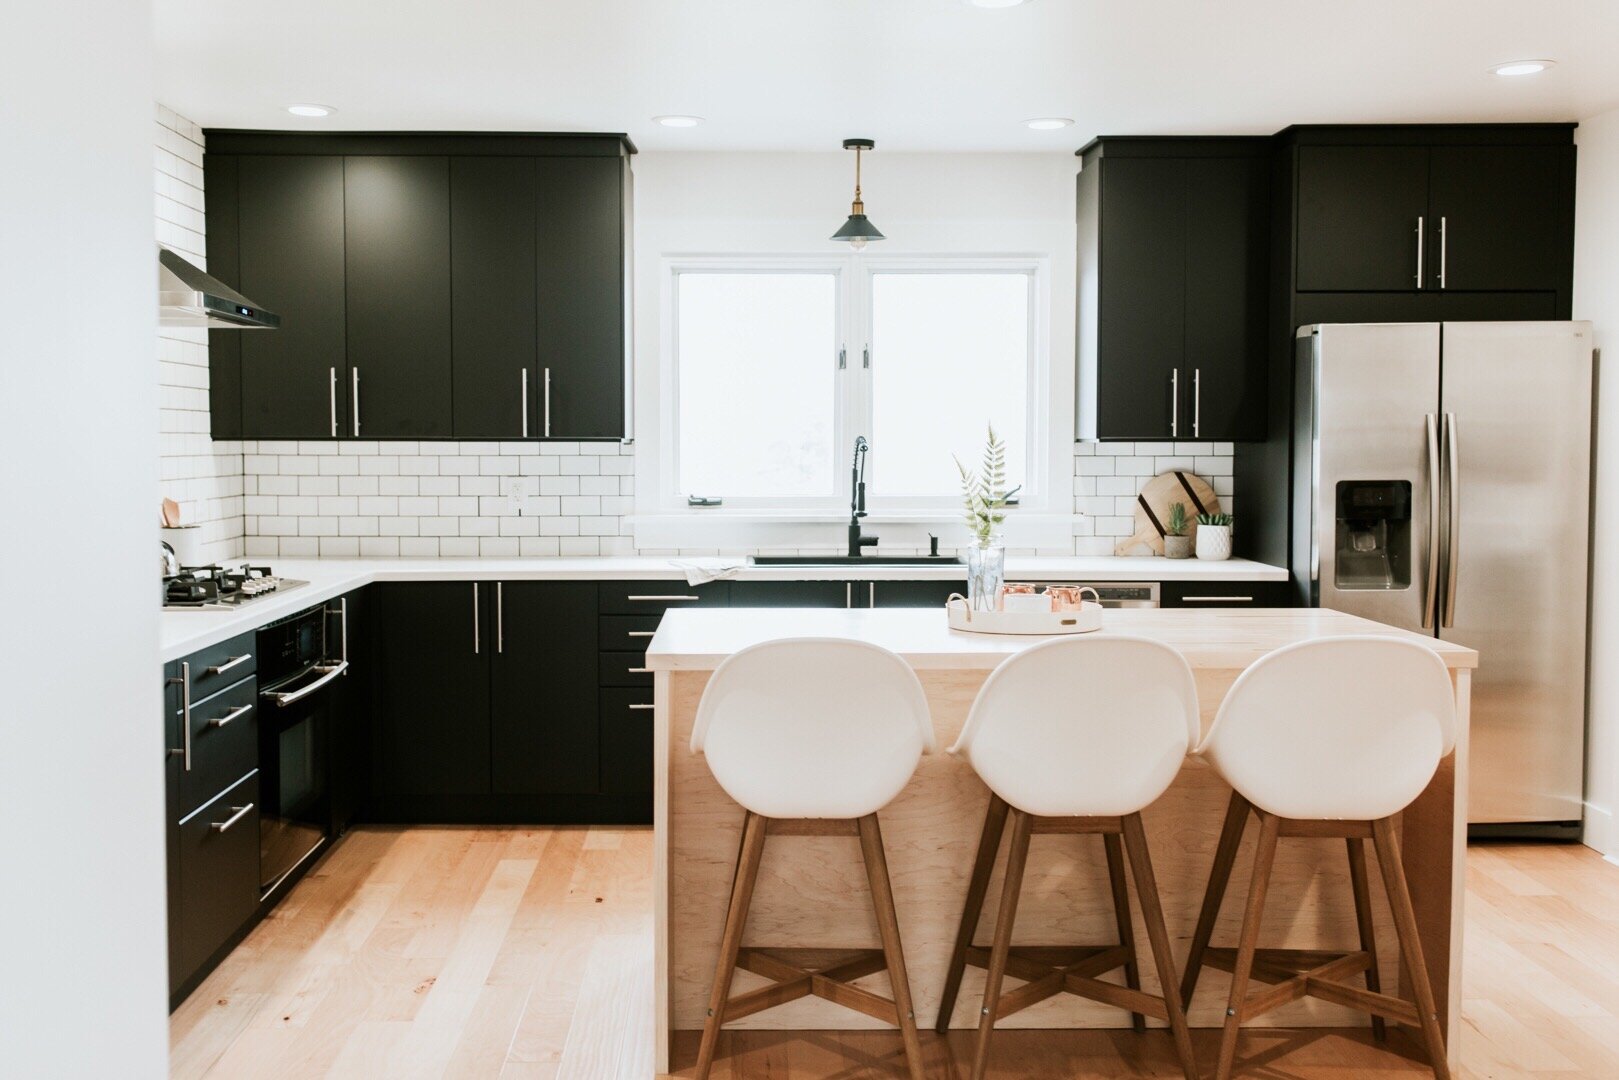 10 home renovation decisions we regret | Nadine Stay | Home remodel mistakes you should avoid. Get a counter depth fridge, install a garbage disposal, put an outlet in the kitchen island, level the floors, and fix your foundation first.